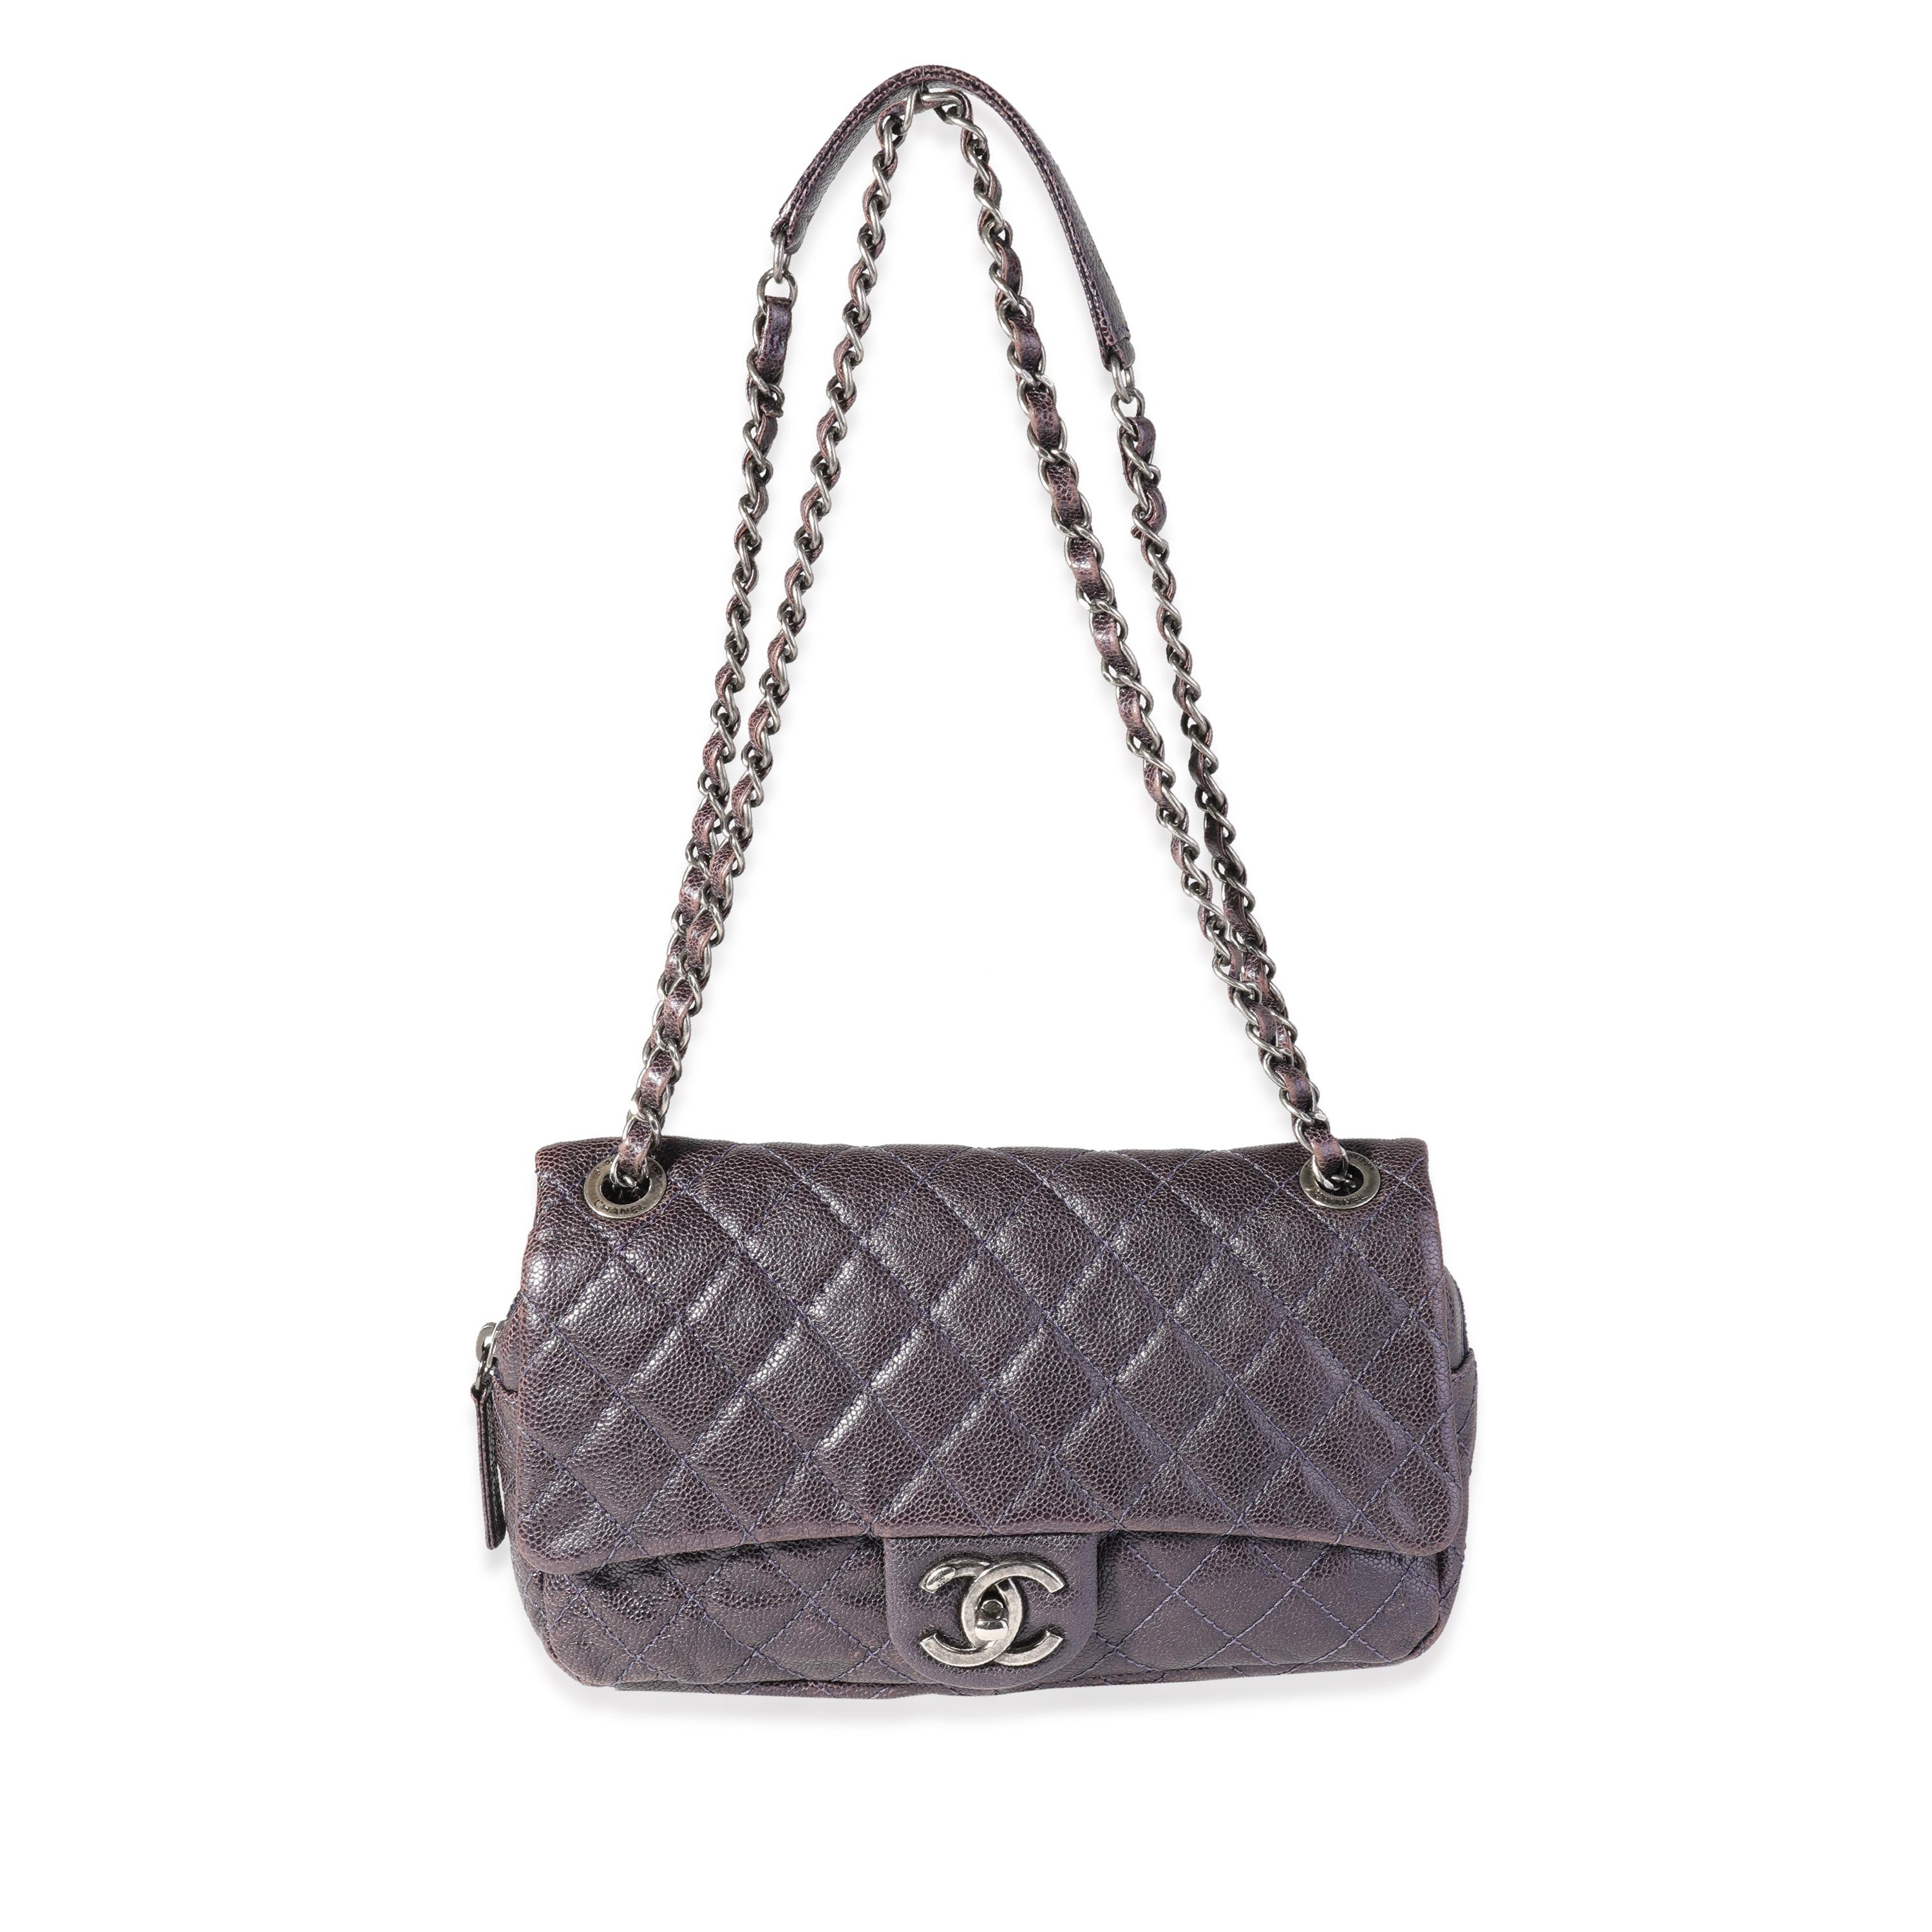 Listing Title: Chanel Purple Quilted Caviar Easy Flap Bag
SKU: 119571
Condition: Pre-owned (3000)
Handbag Condition: Good
Condition Comments: Good Condition. Moderate discoloration to exterior throughout. Wear to corners. Faint discoloration to